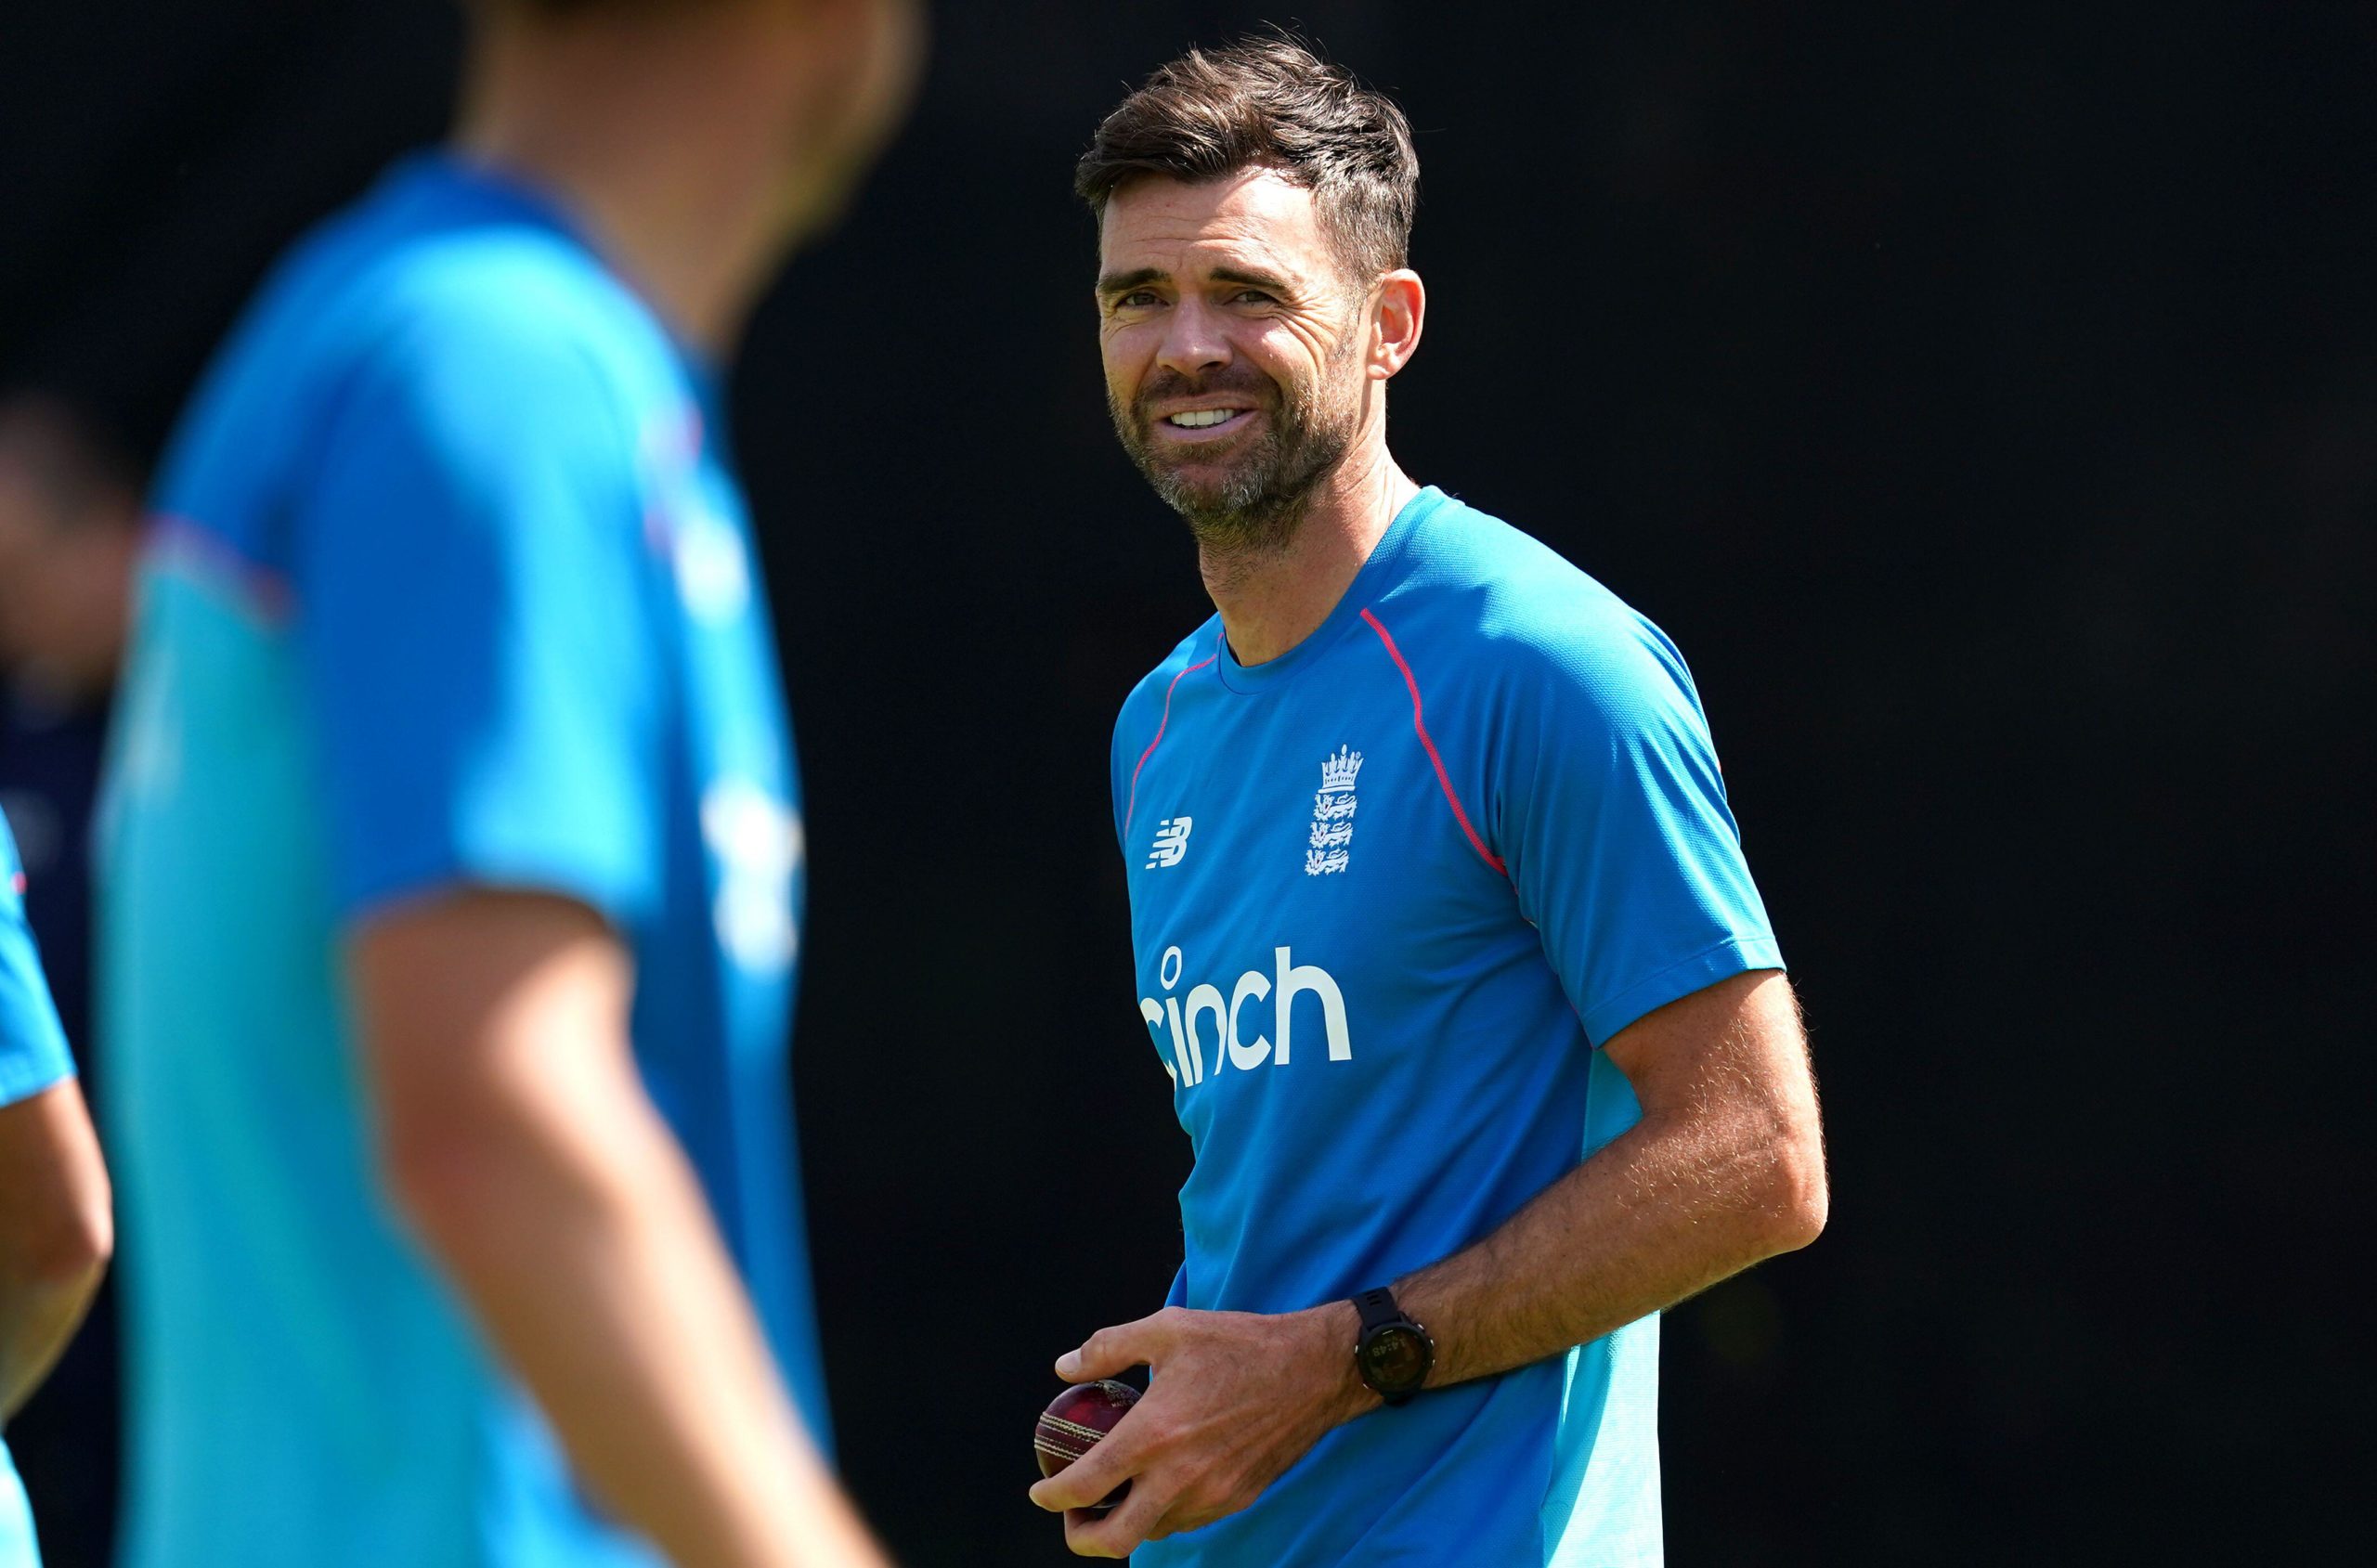 England bowler Jimmy Anderson